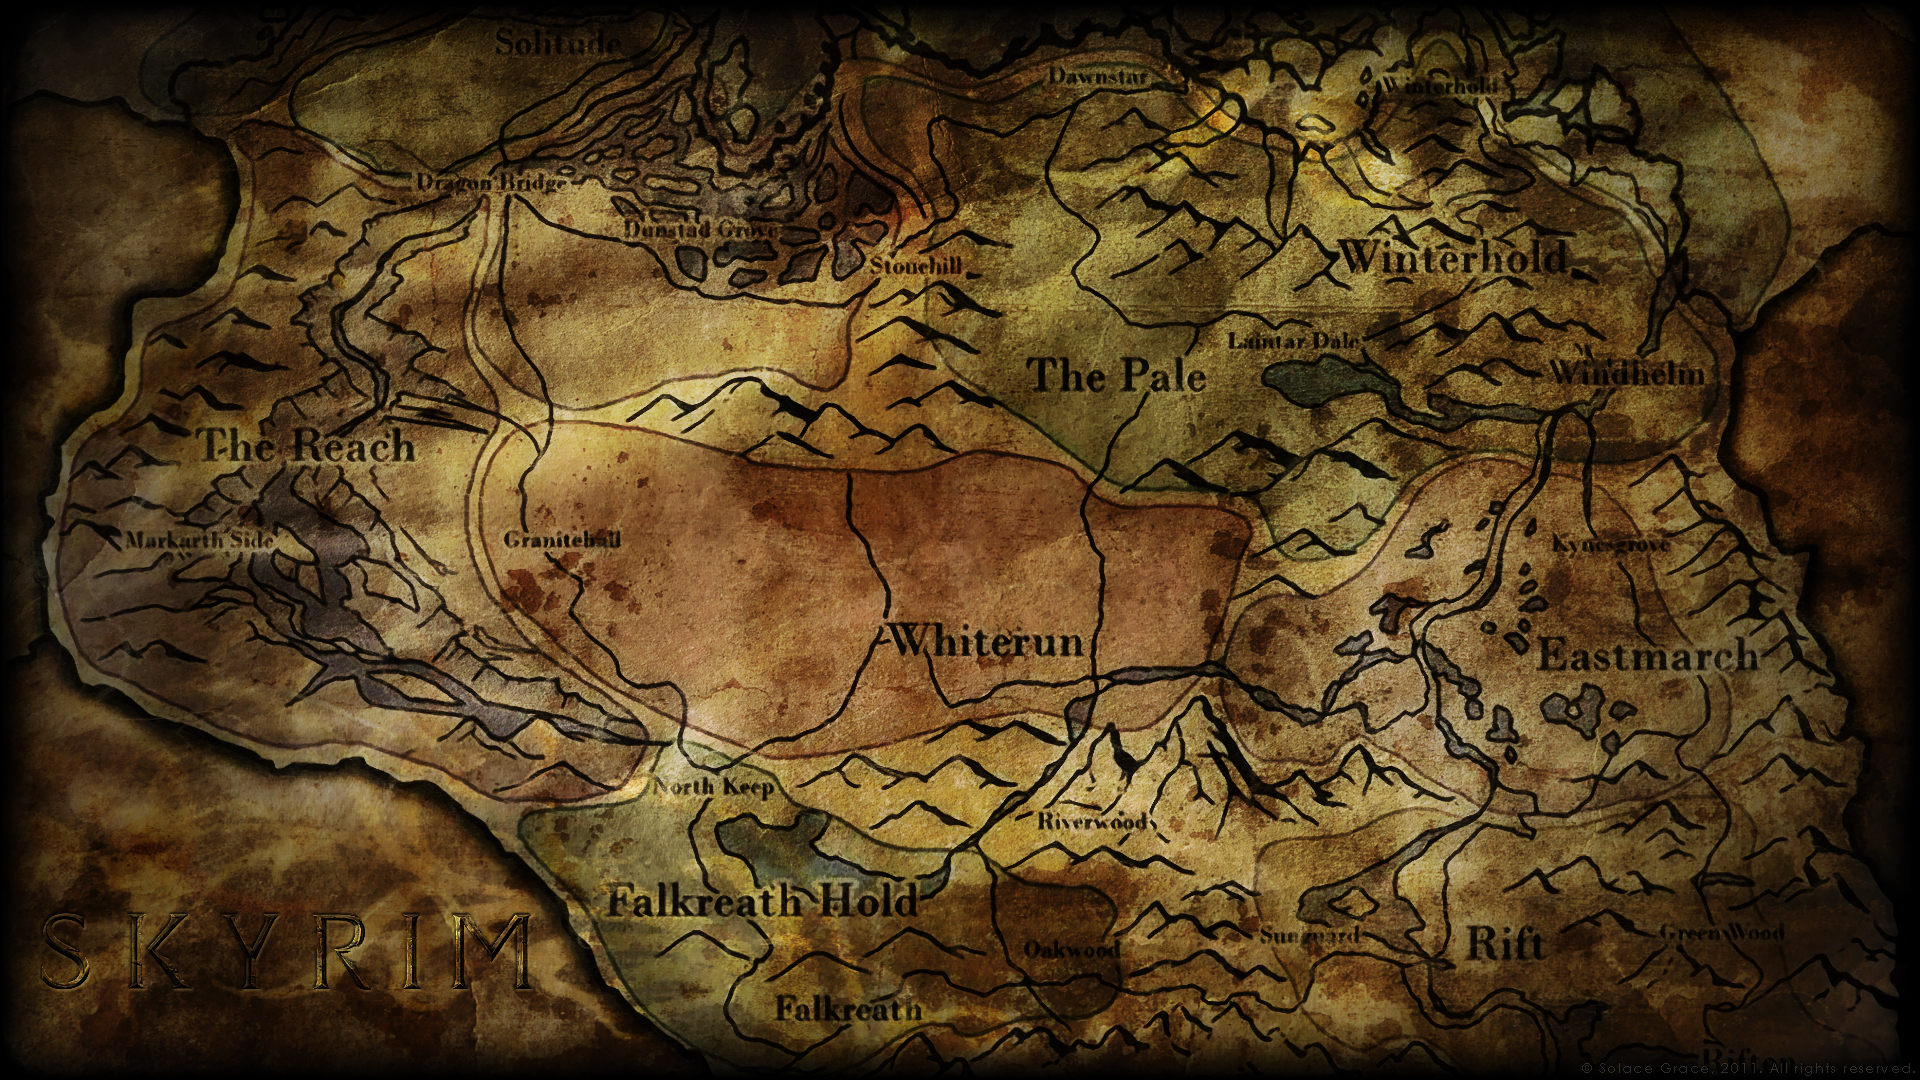 Skyrim Map Over 25 Different Maps Of Skyrim To Map Out Your Journey